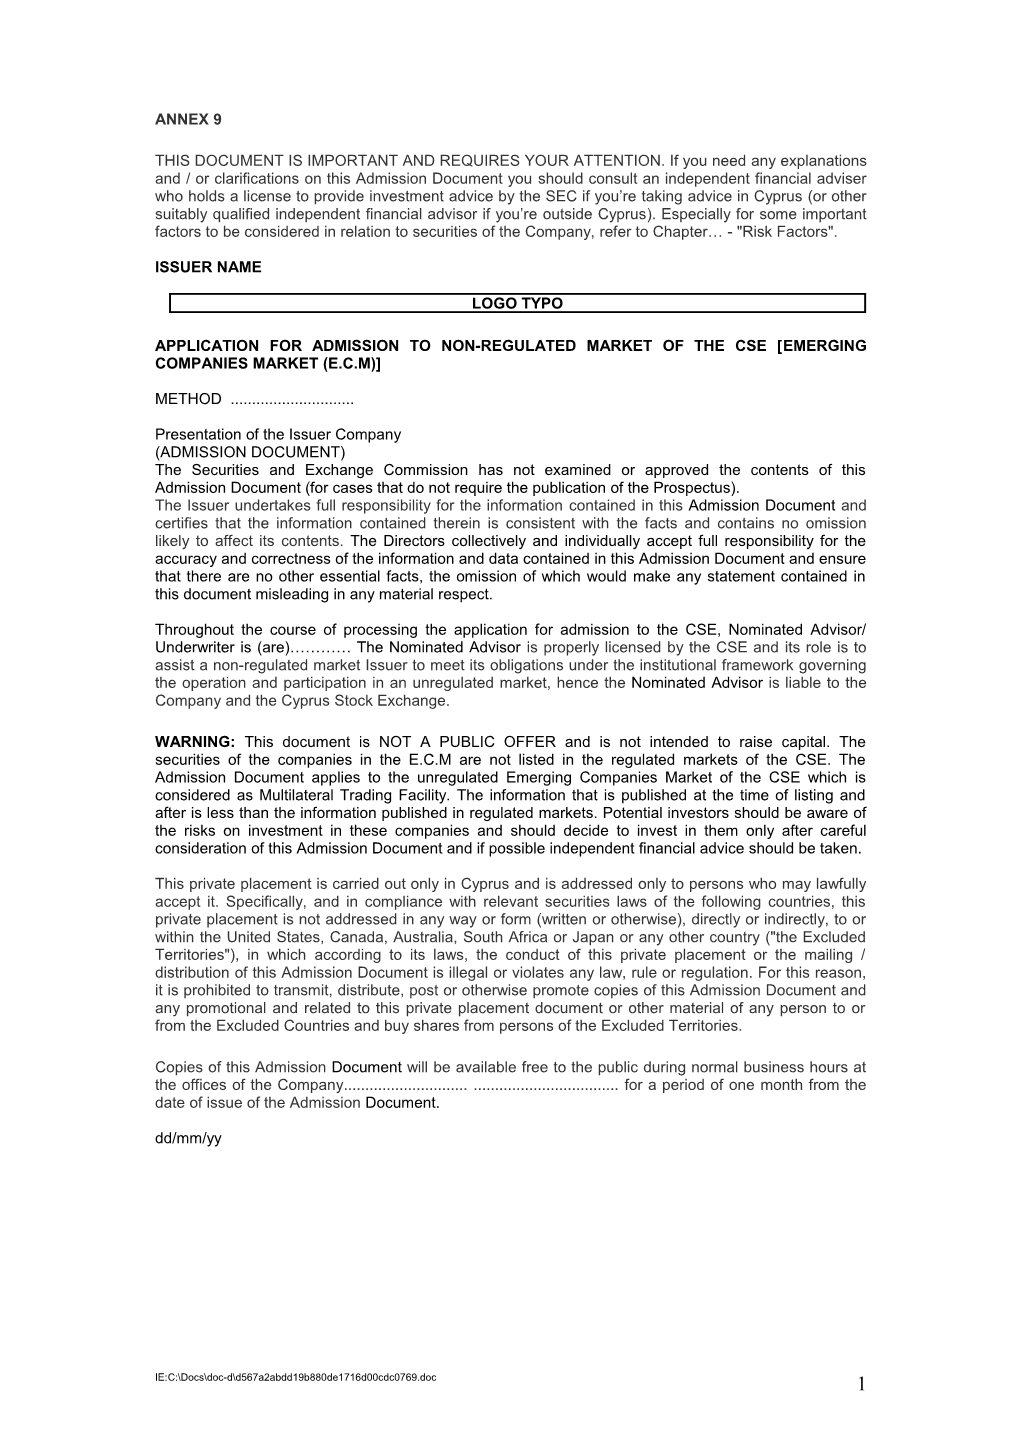 Application for Admission to Non-Regulated Market of the Cse Εmerging Companies Market (E.C.M)